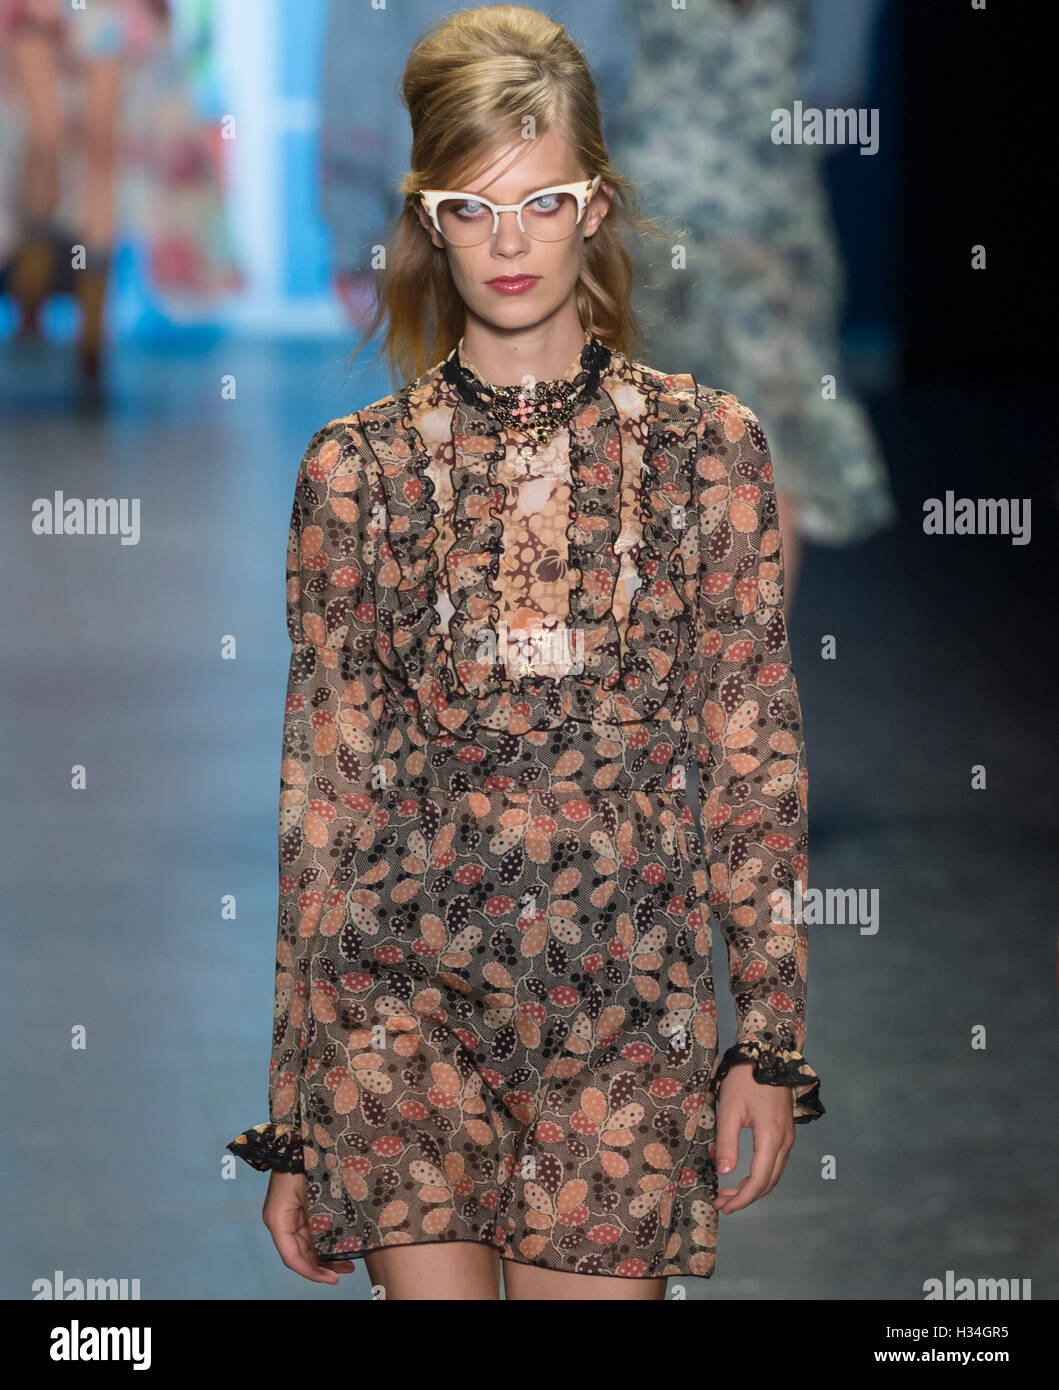 NEW YORK, NY - SEPTEMBER 14, 2016: A model walks the runway at the Anna Sui Spring Summer 2017 fashion show during NYFW Stock Photo